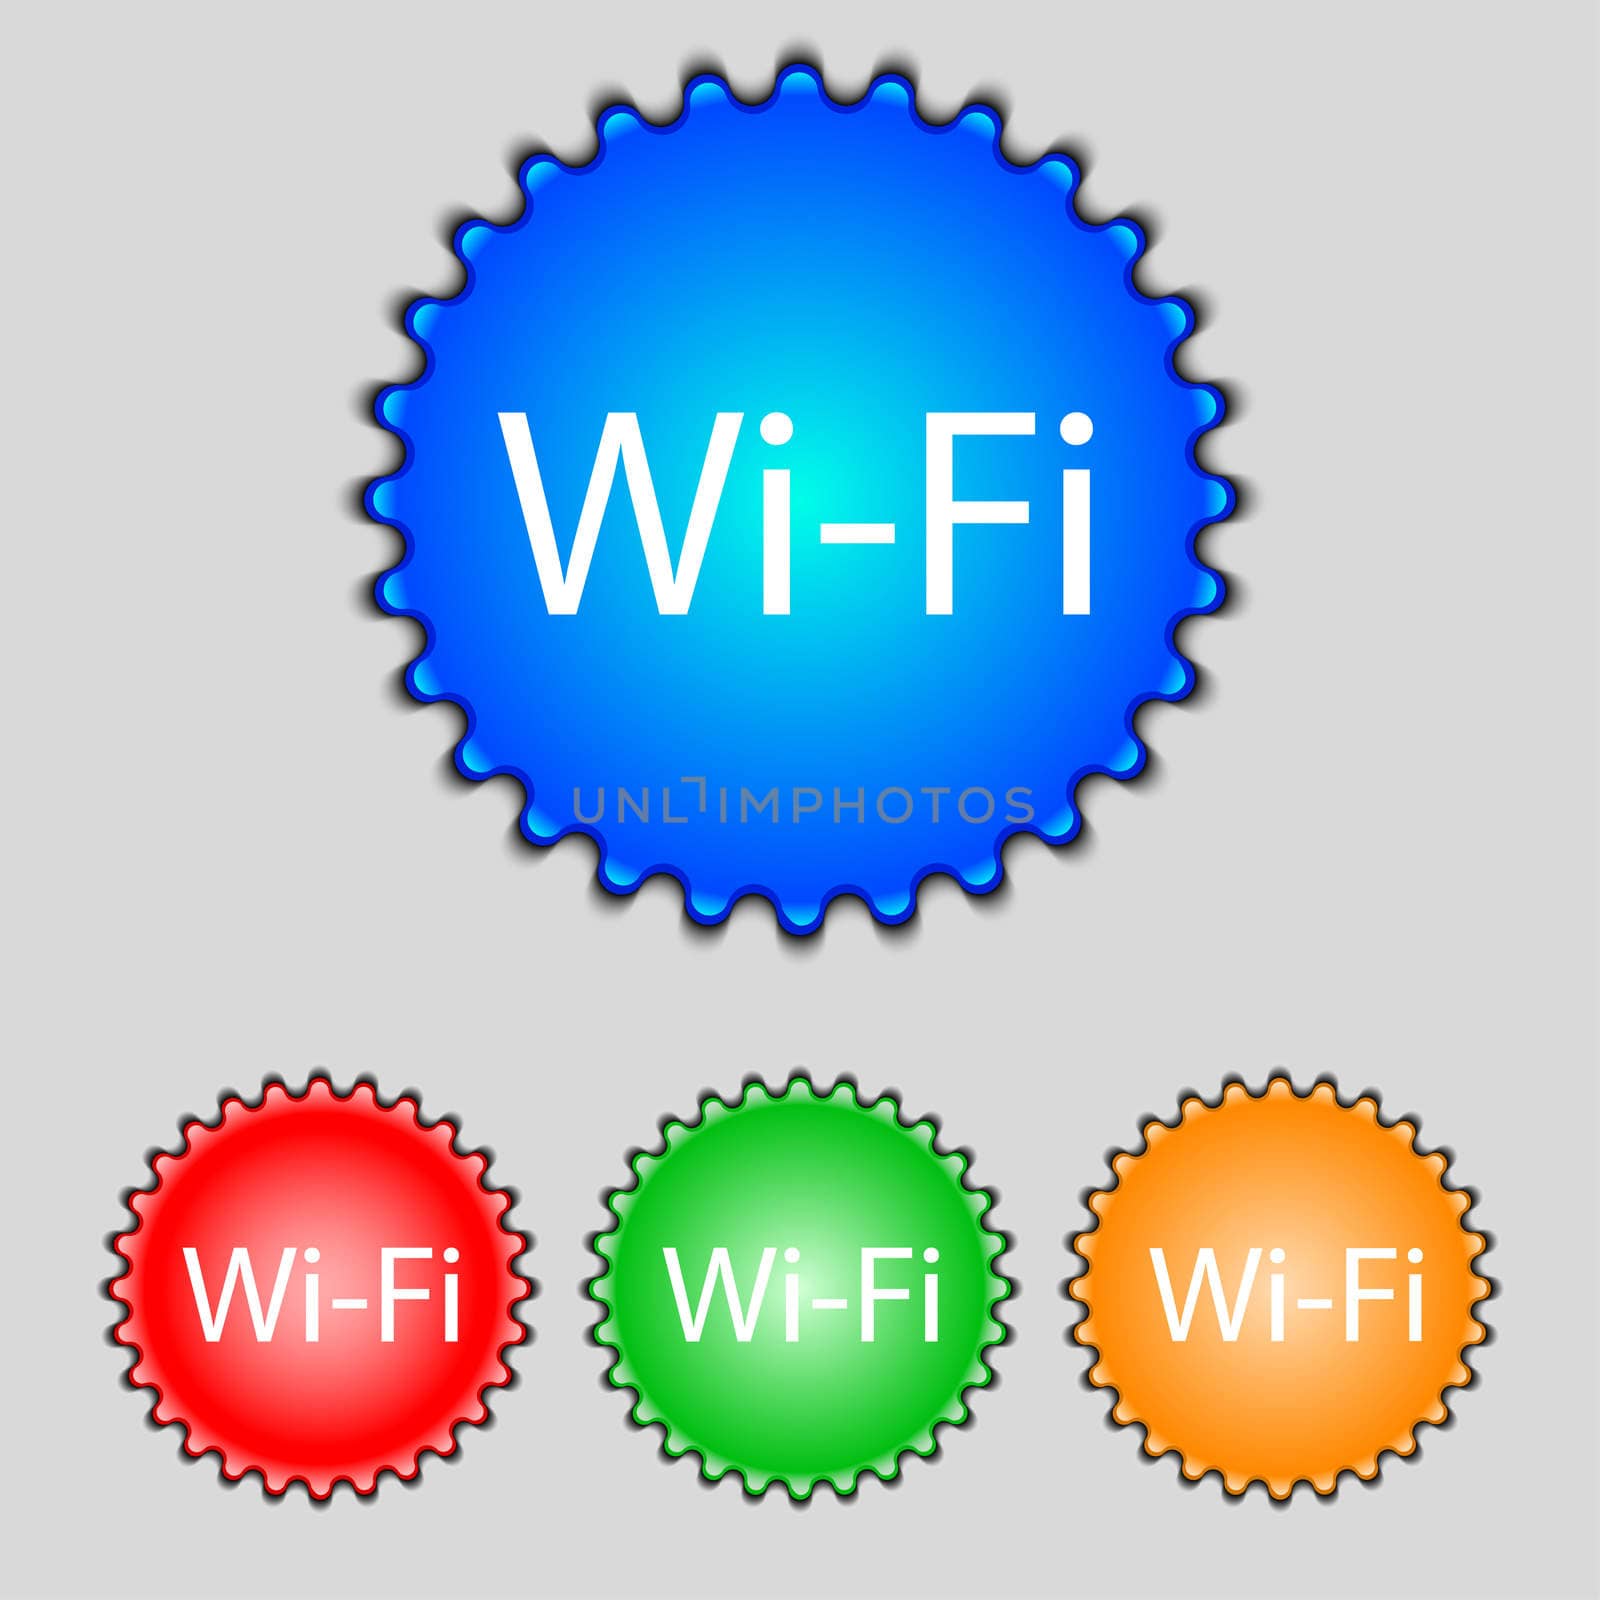 Free wifi sign. Wi-fi symbol. Wireless Network icon Set of colored buttons.  by serhii_lohvyniuk